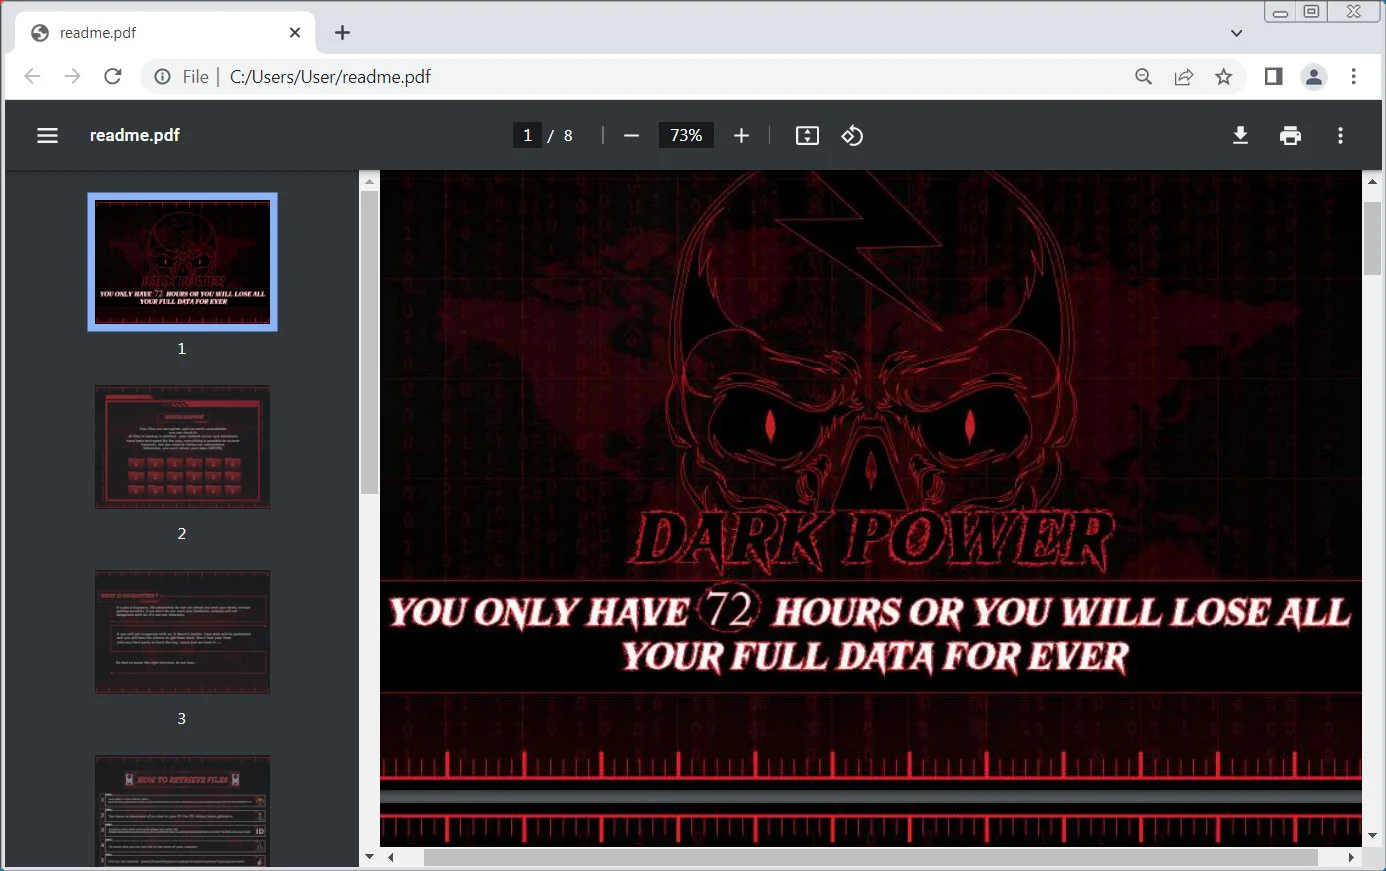 takian.ir new dark power ransomware claims 10 victims in its first month 4